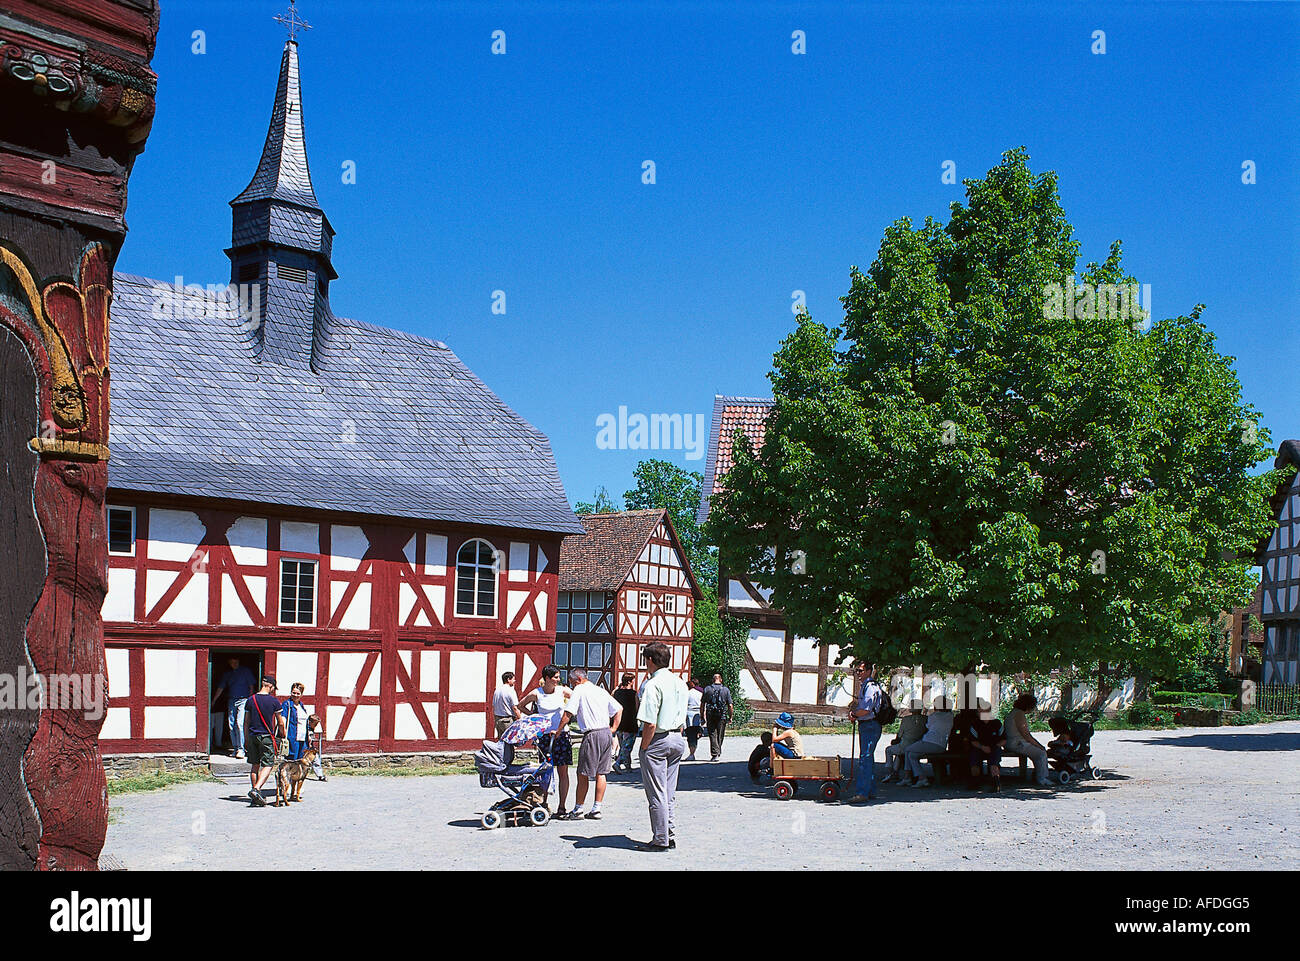 Old half-timbered house, Open Air Museum Hessenpark Taunus, Hesse, Germany Stock Photo